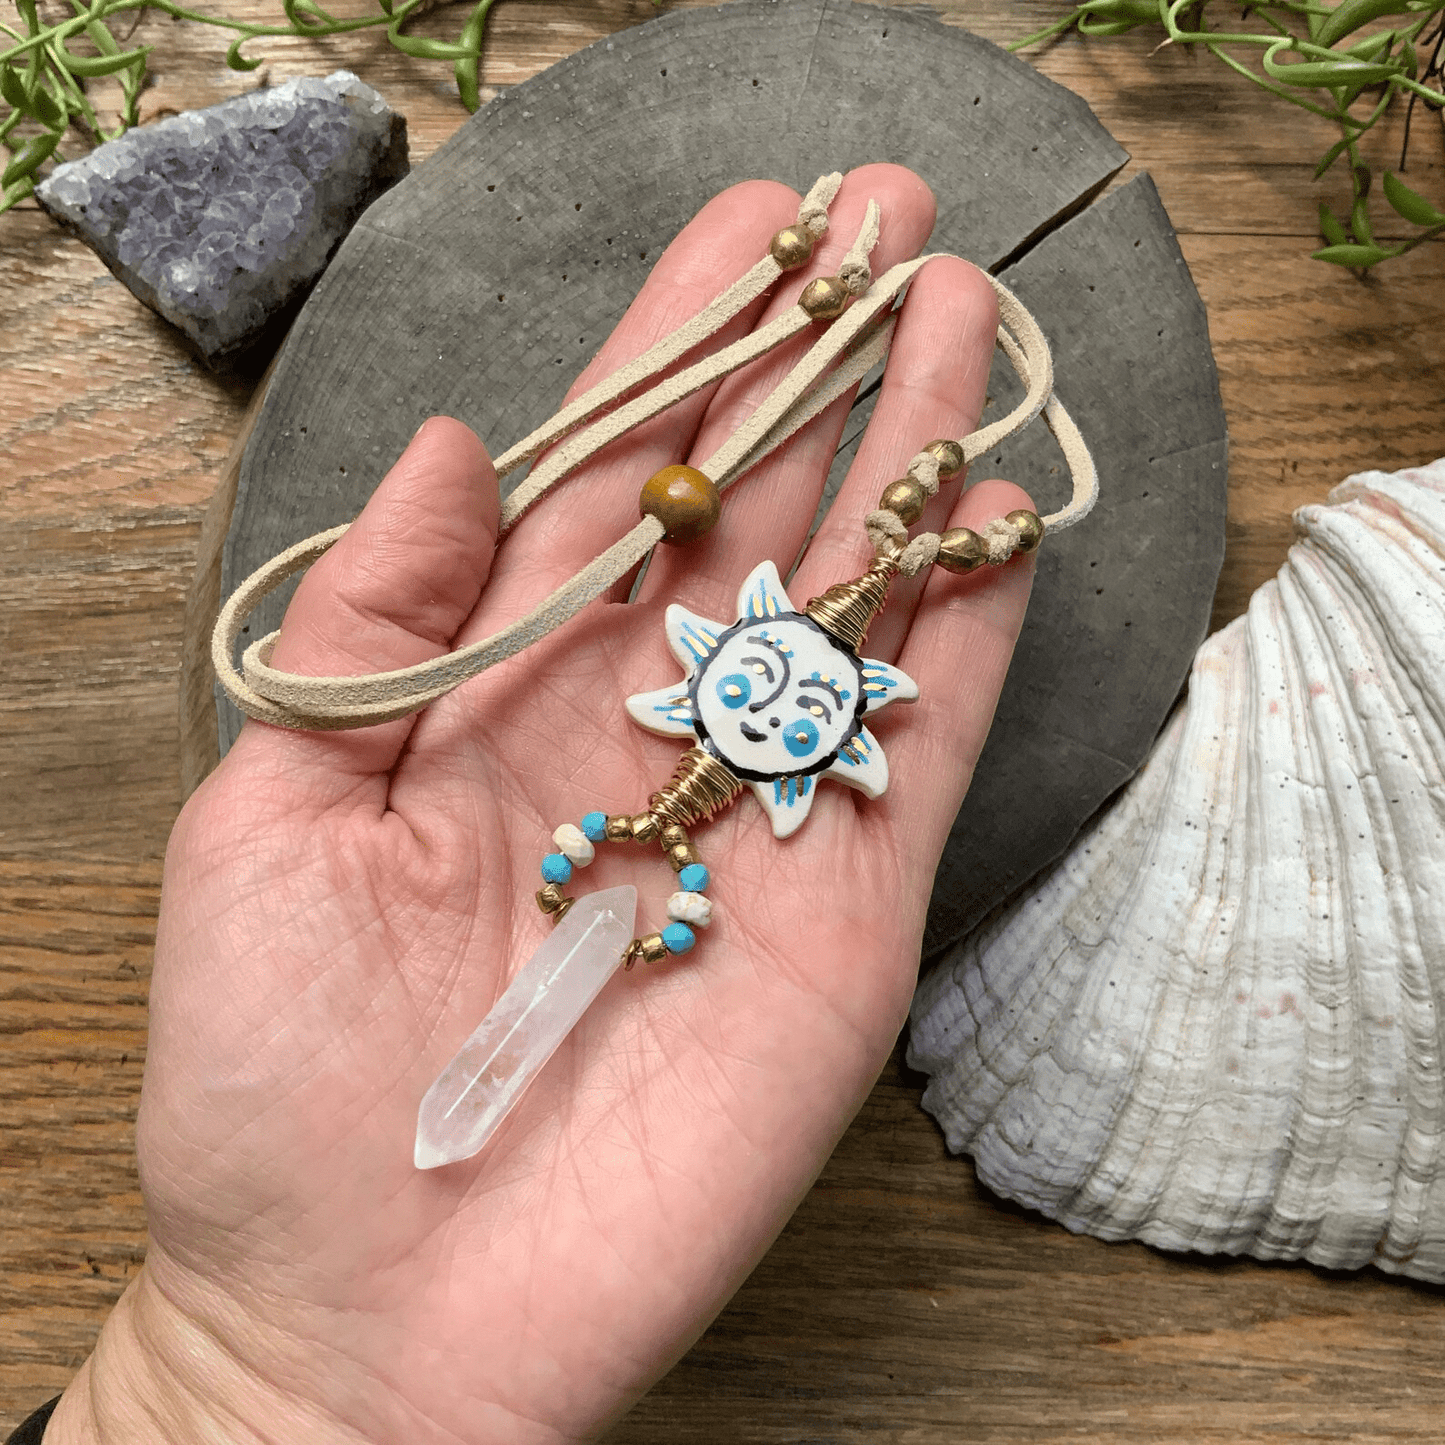 Folk art ceramic Sun and Crystal point necklace on beige vegan suede cord